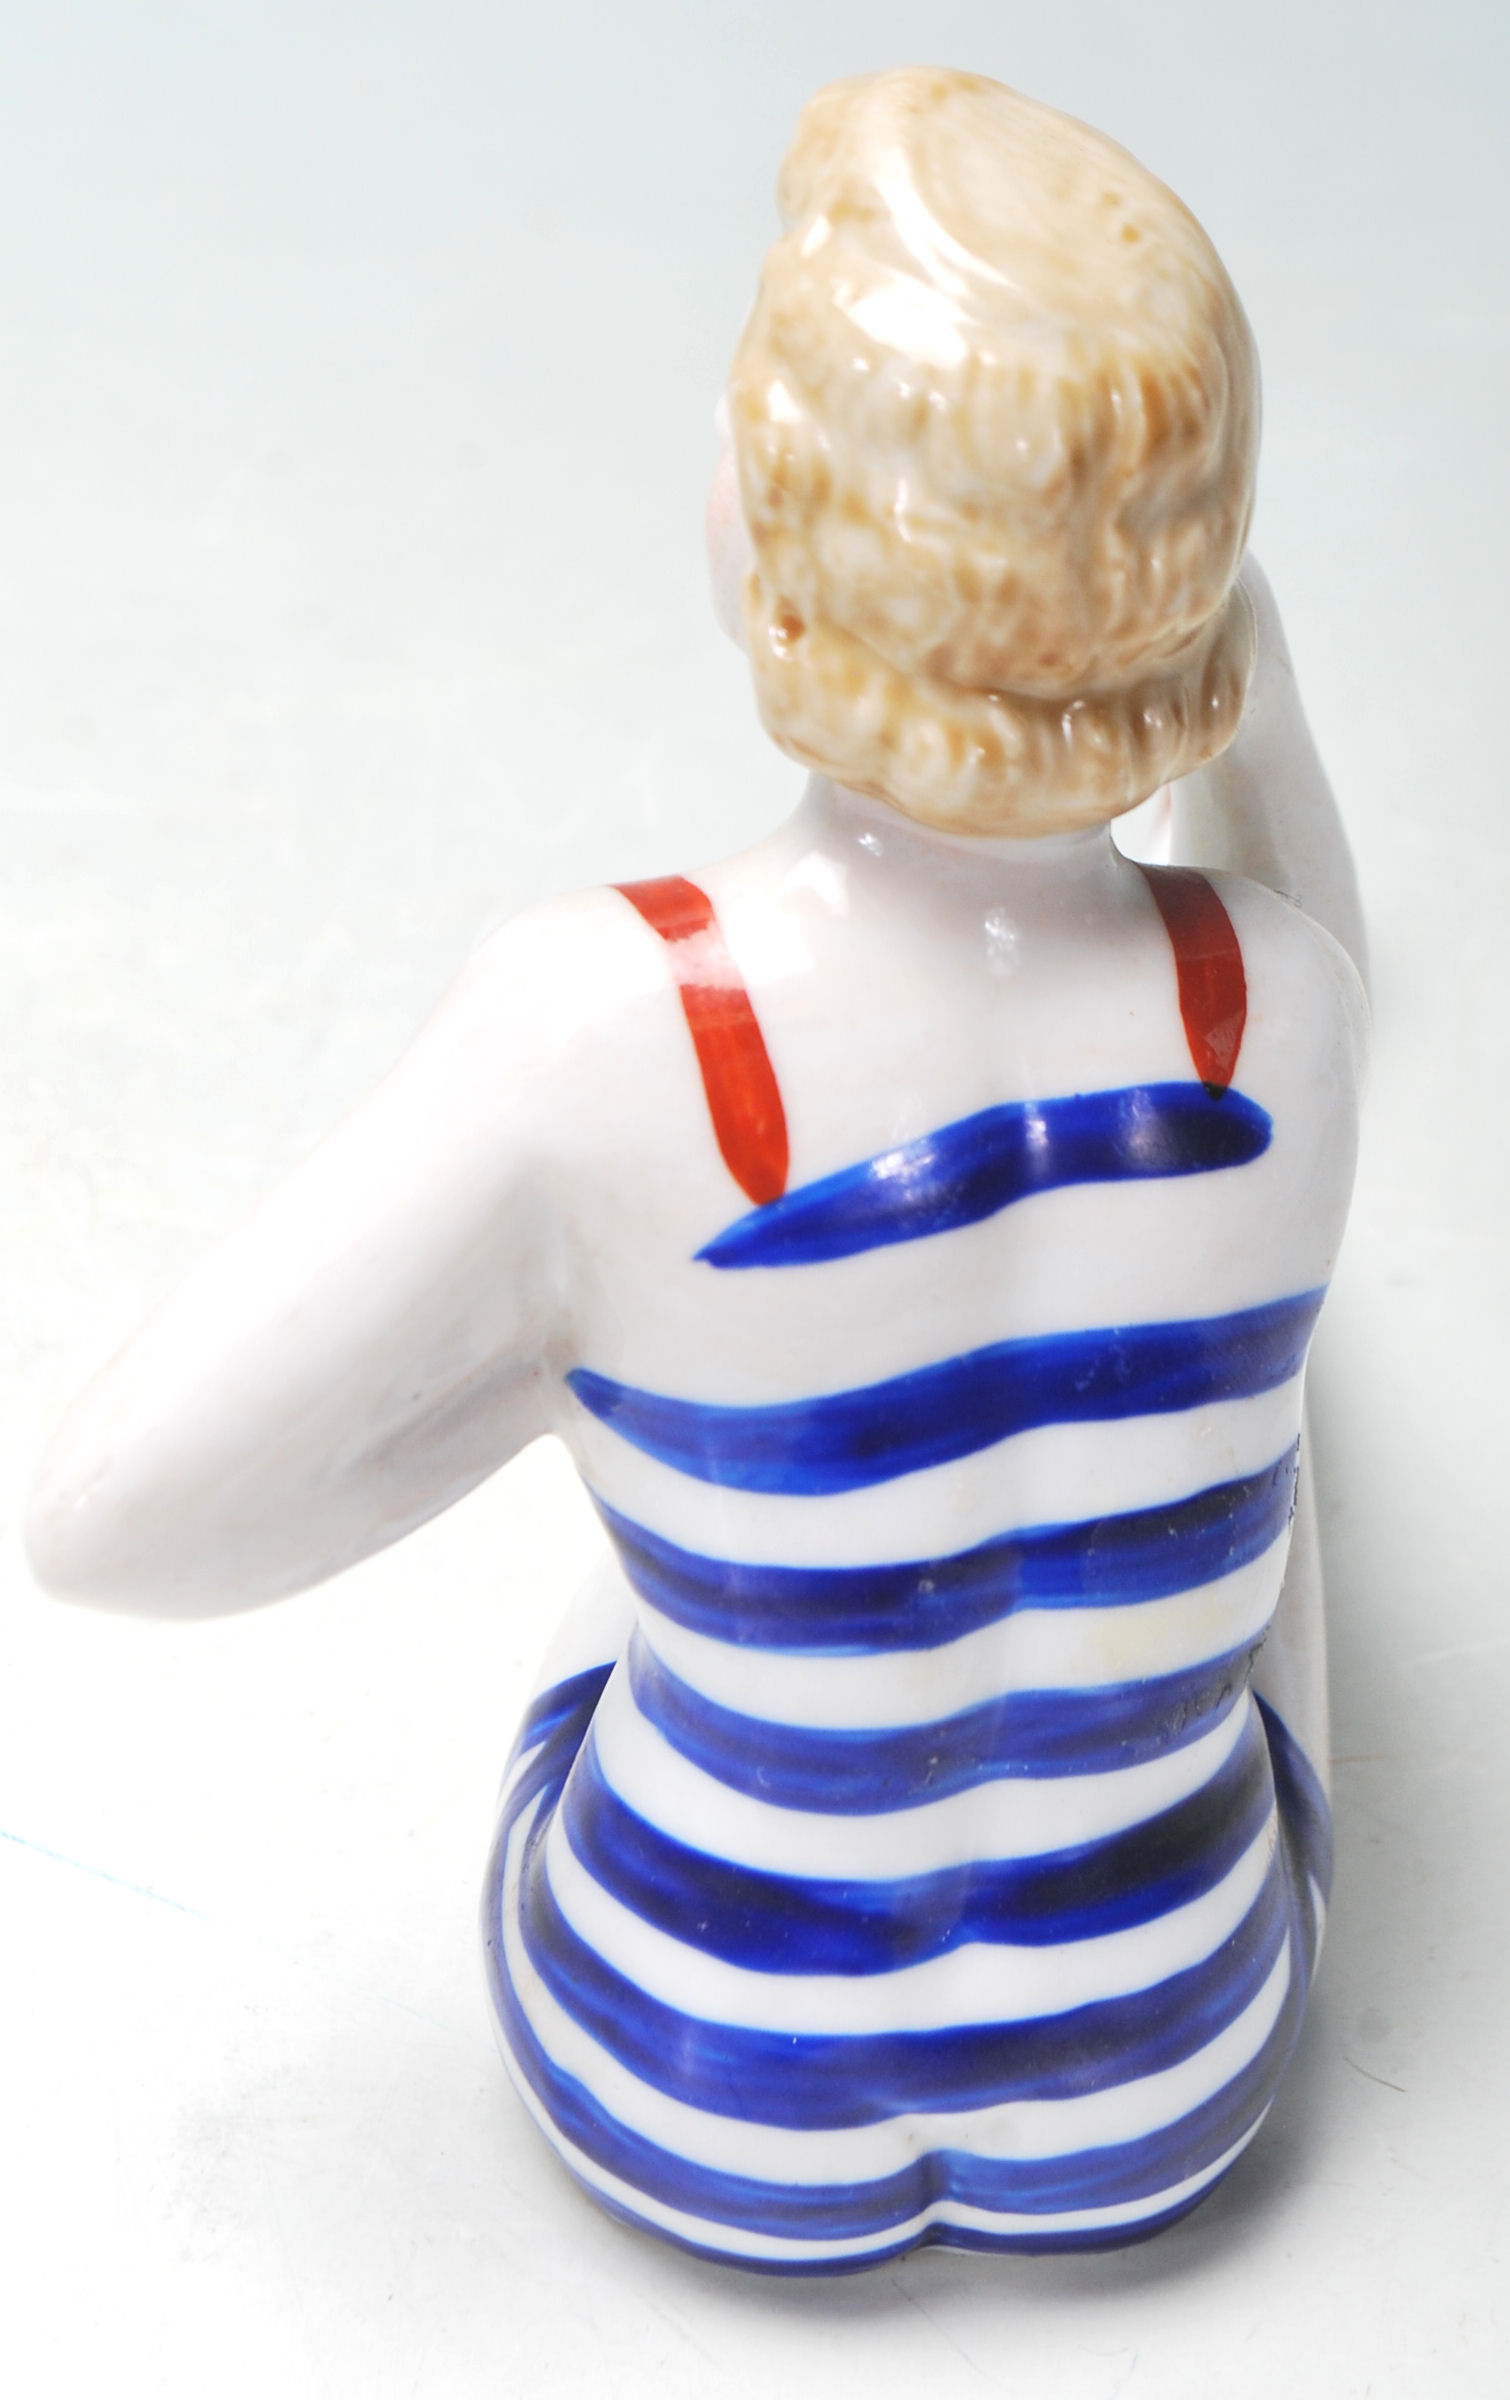 A 20TH CENTURY RETRO CERAMIC FIGURE OF A 1940'S PIN UP MODEL. - Image 4 of 7